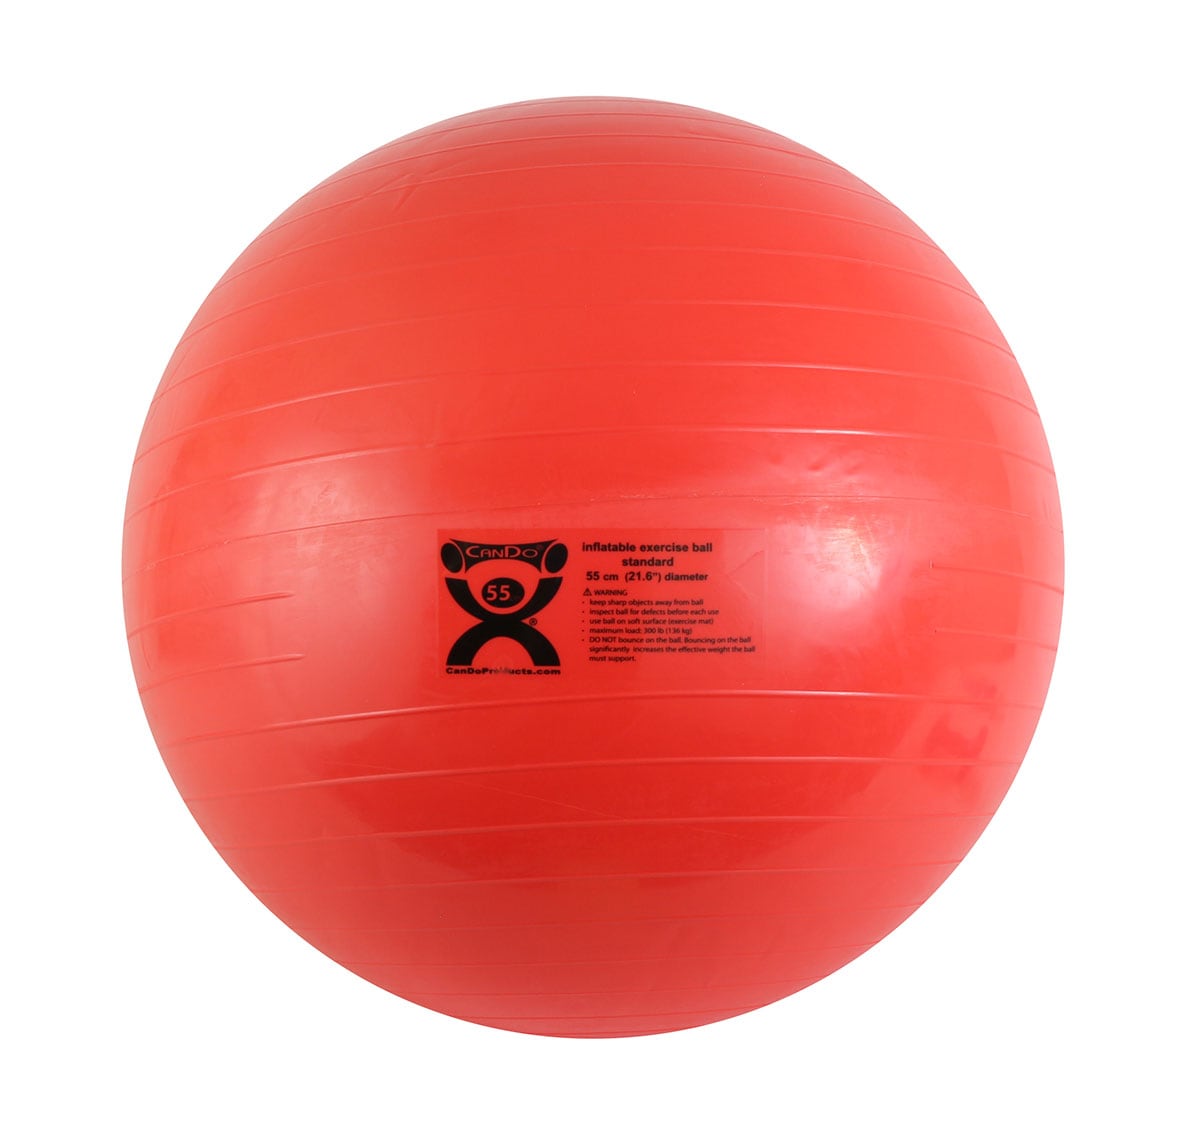 CanDo CanDo Inflatable Ball 55-cm Pilates Exercise in the Balls department at Lowes.com